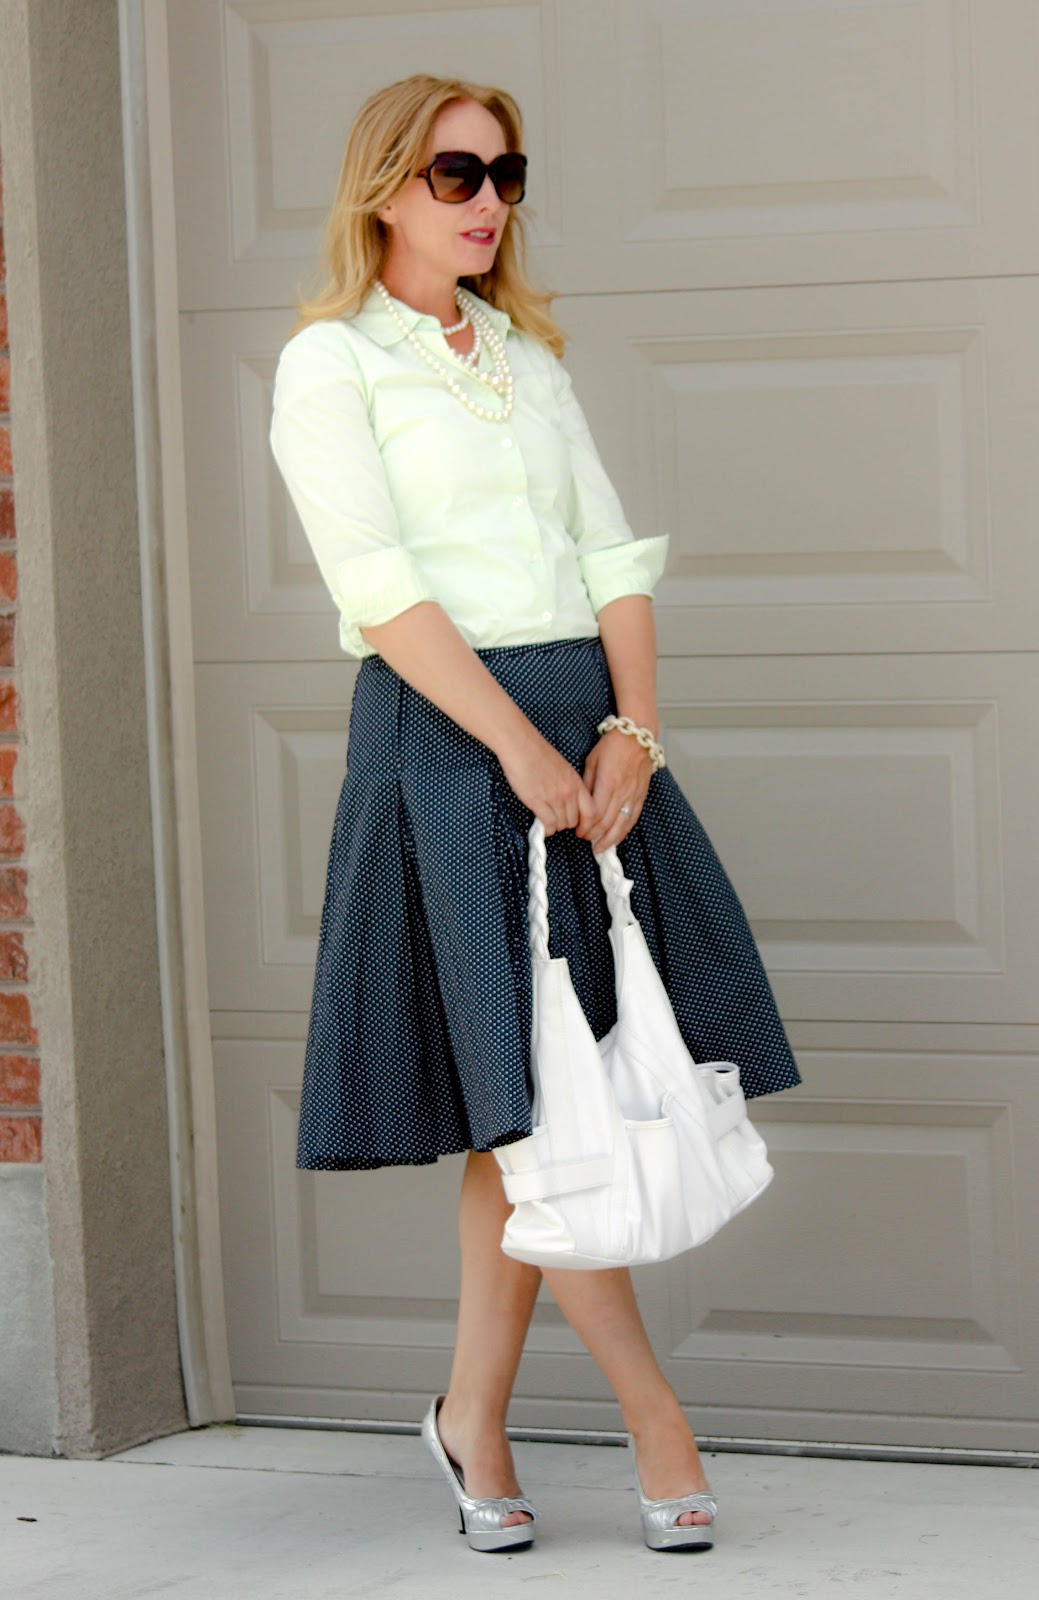 Creamy: Lime and Navy